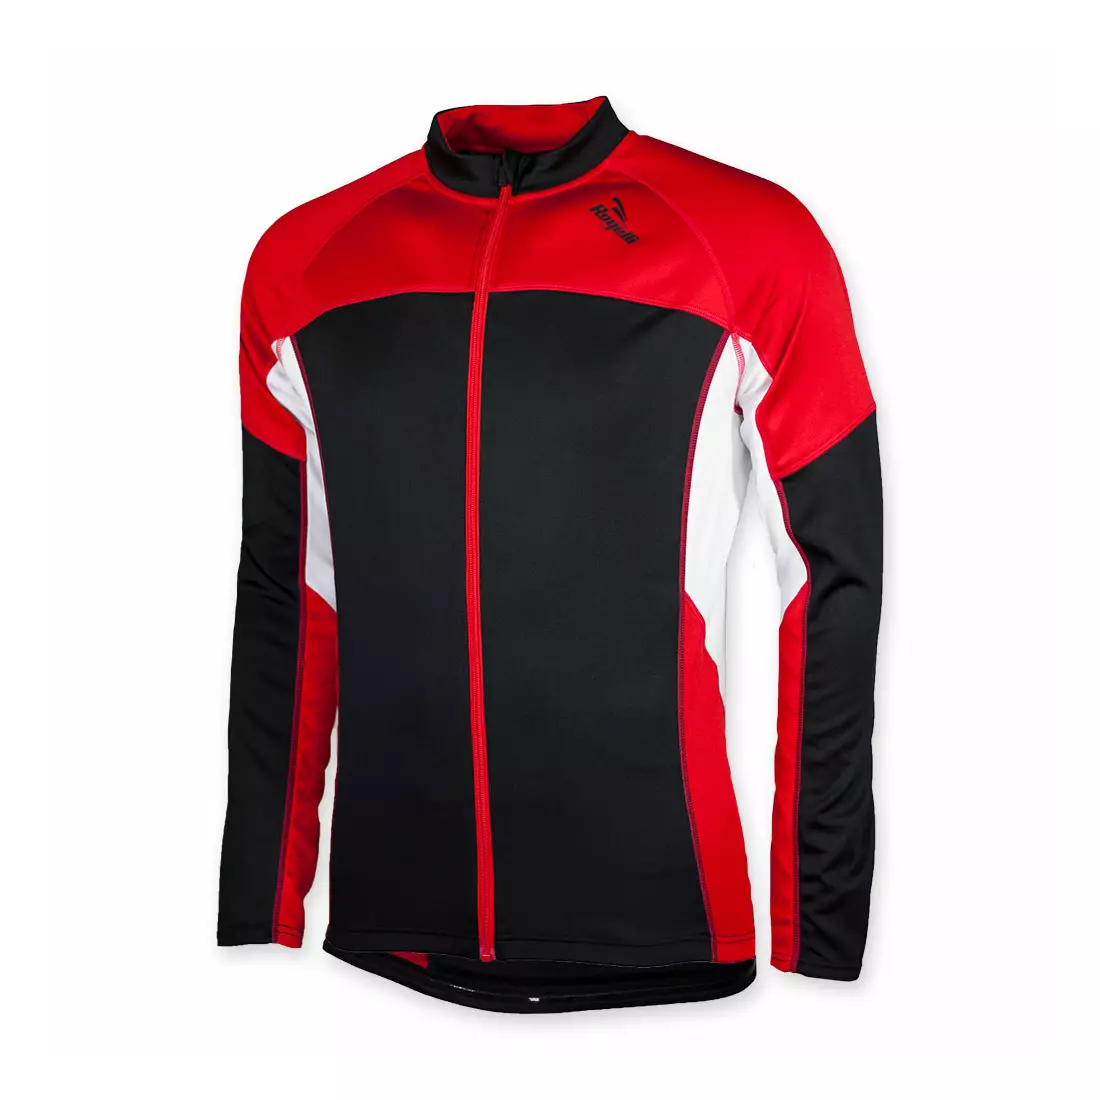 ROGELLI RECCO lightly insulated cycling sweatshirt, black and red